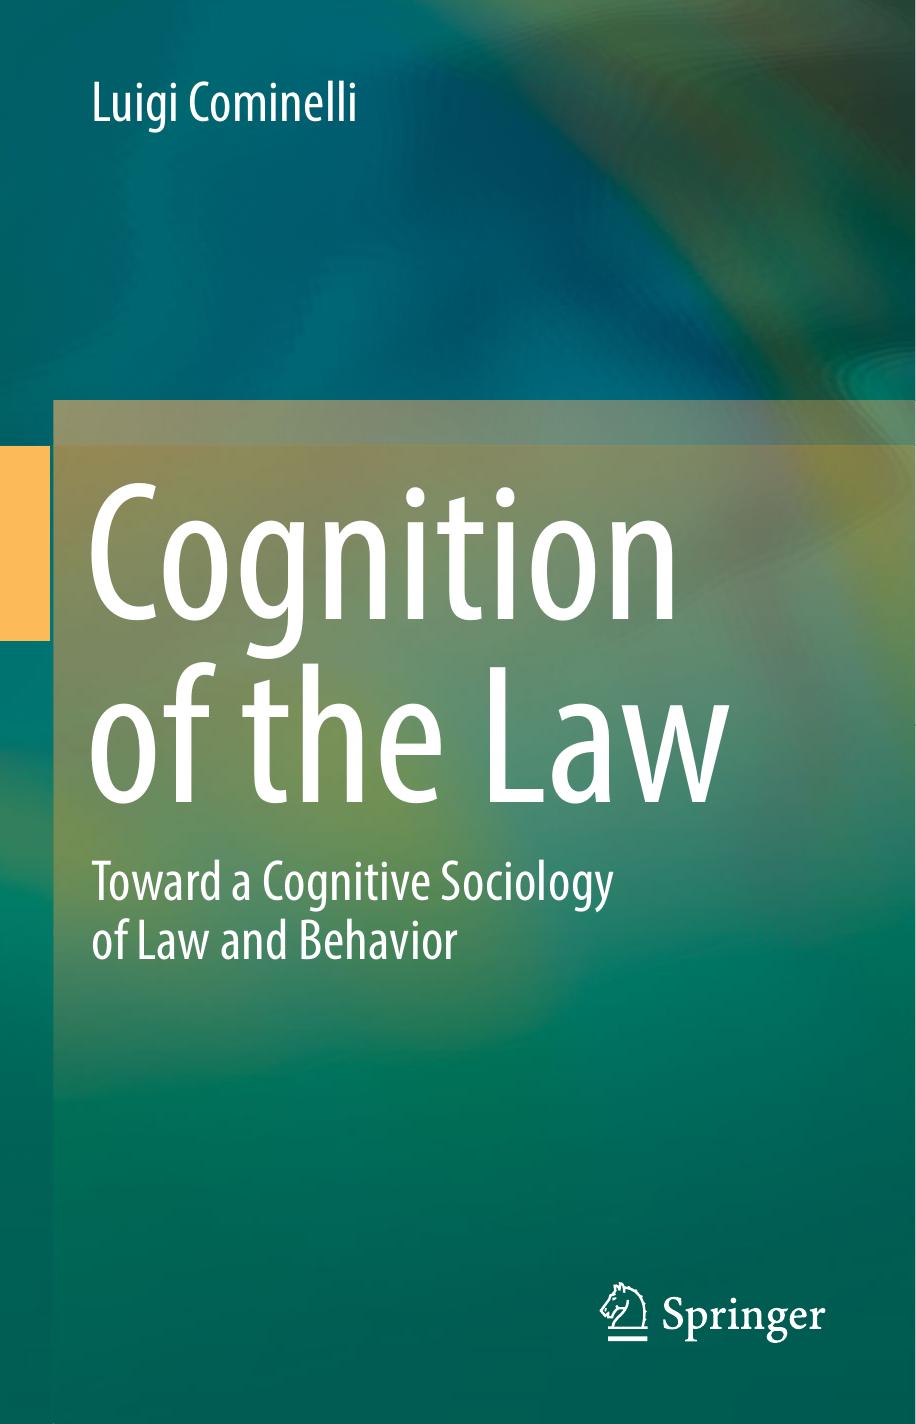 Cognition of the Law by Luigi Cominelli